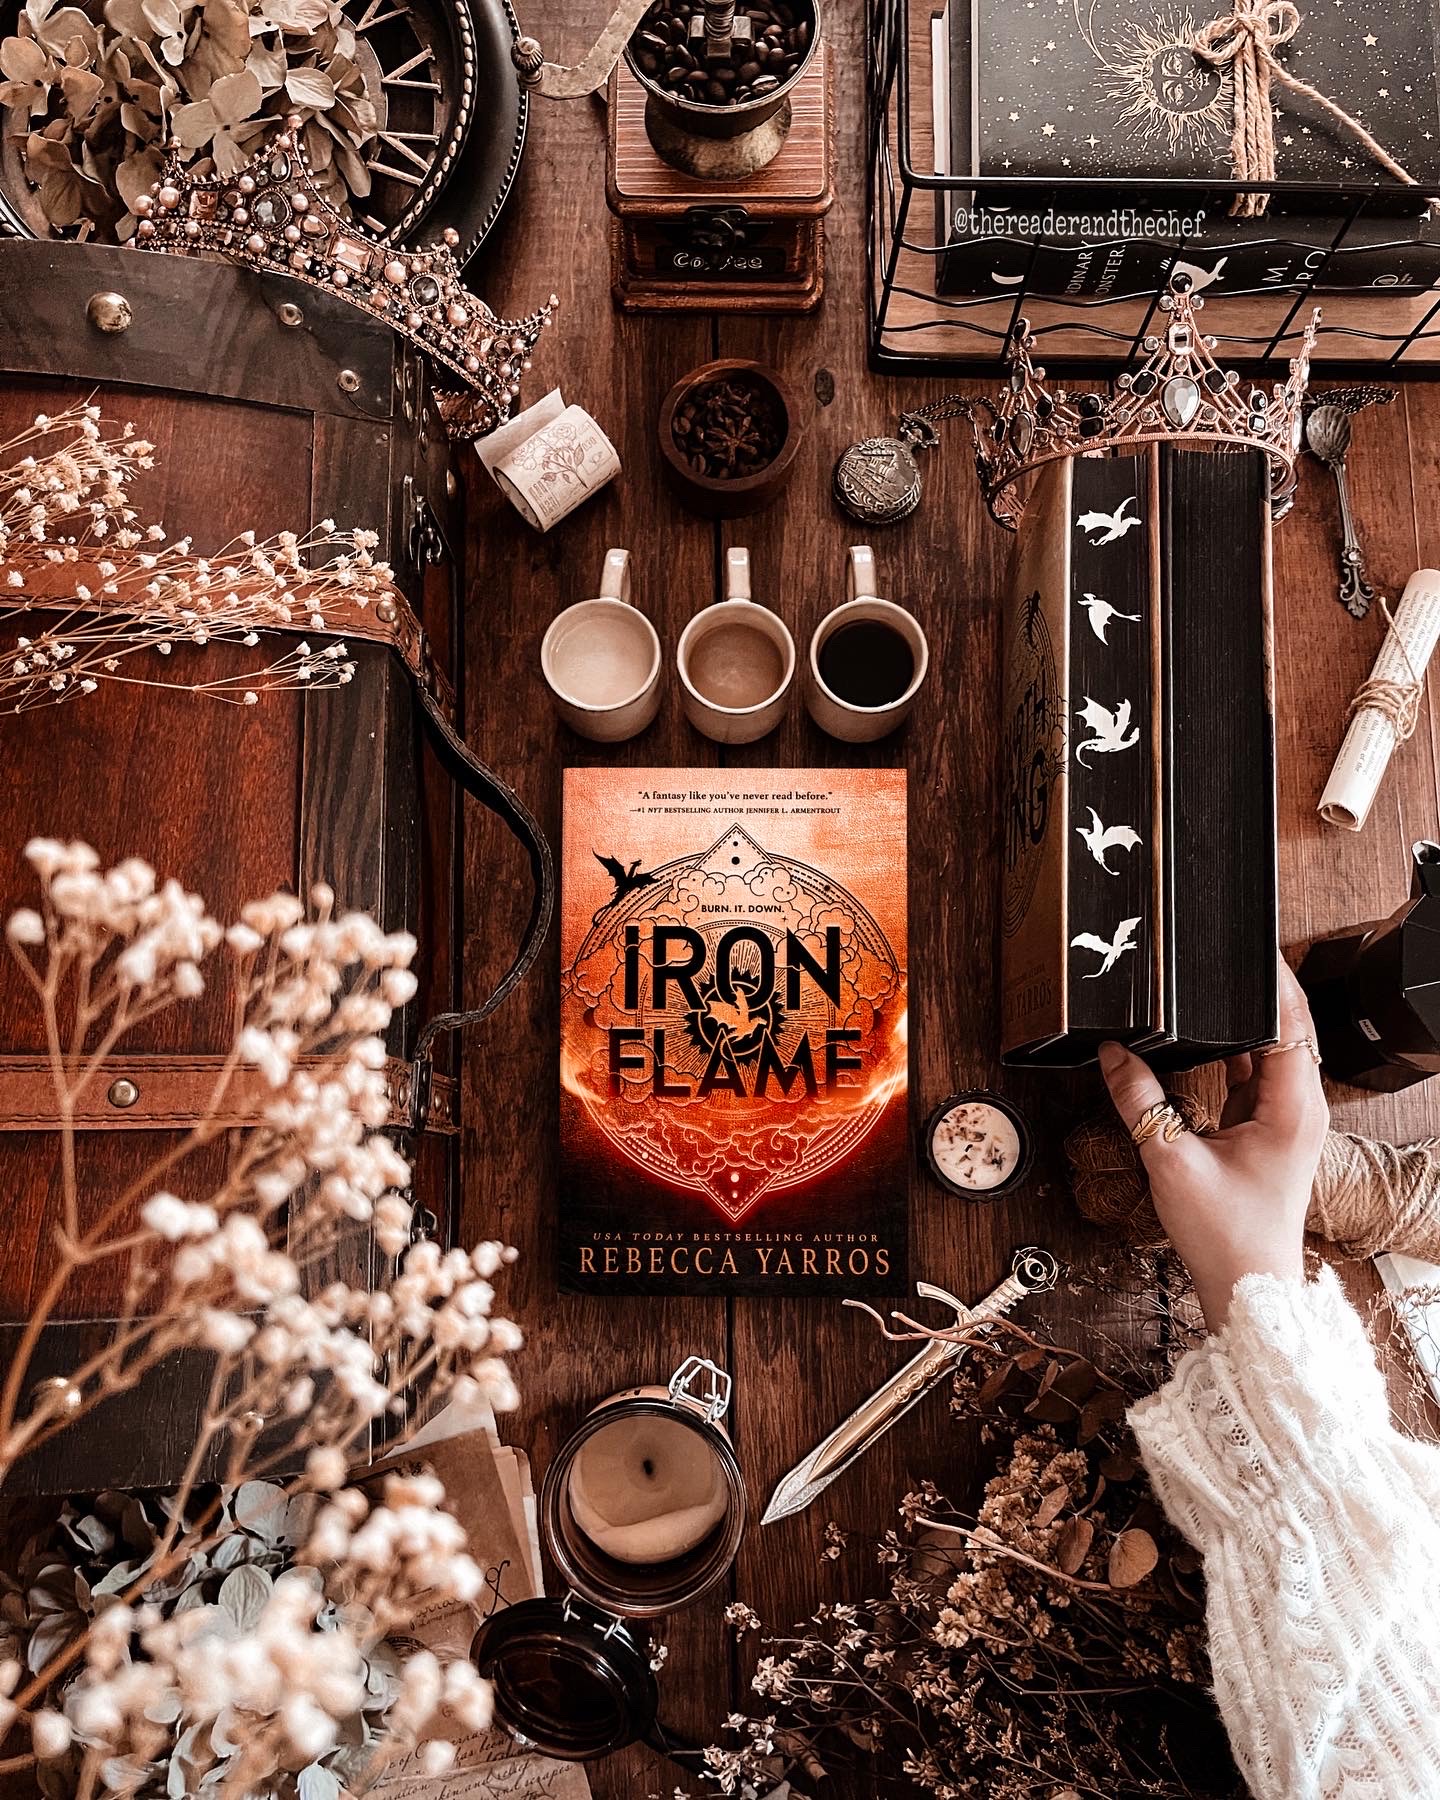 @thereaderandthechef - Iron Flame Cover Reveal